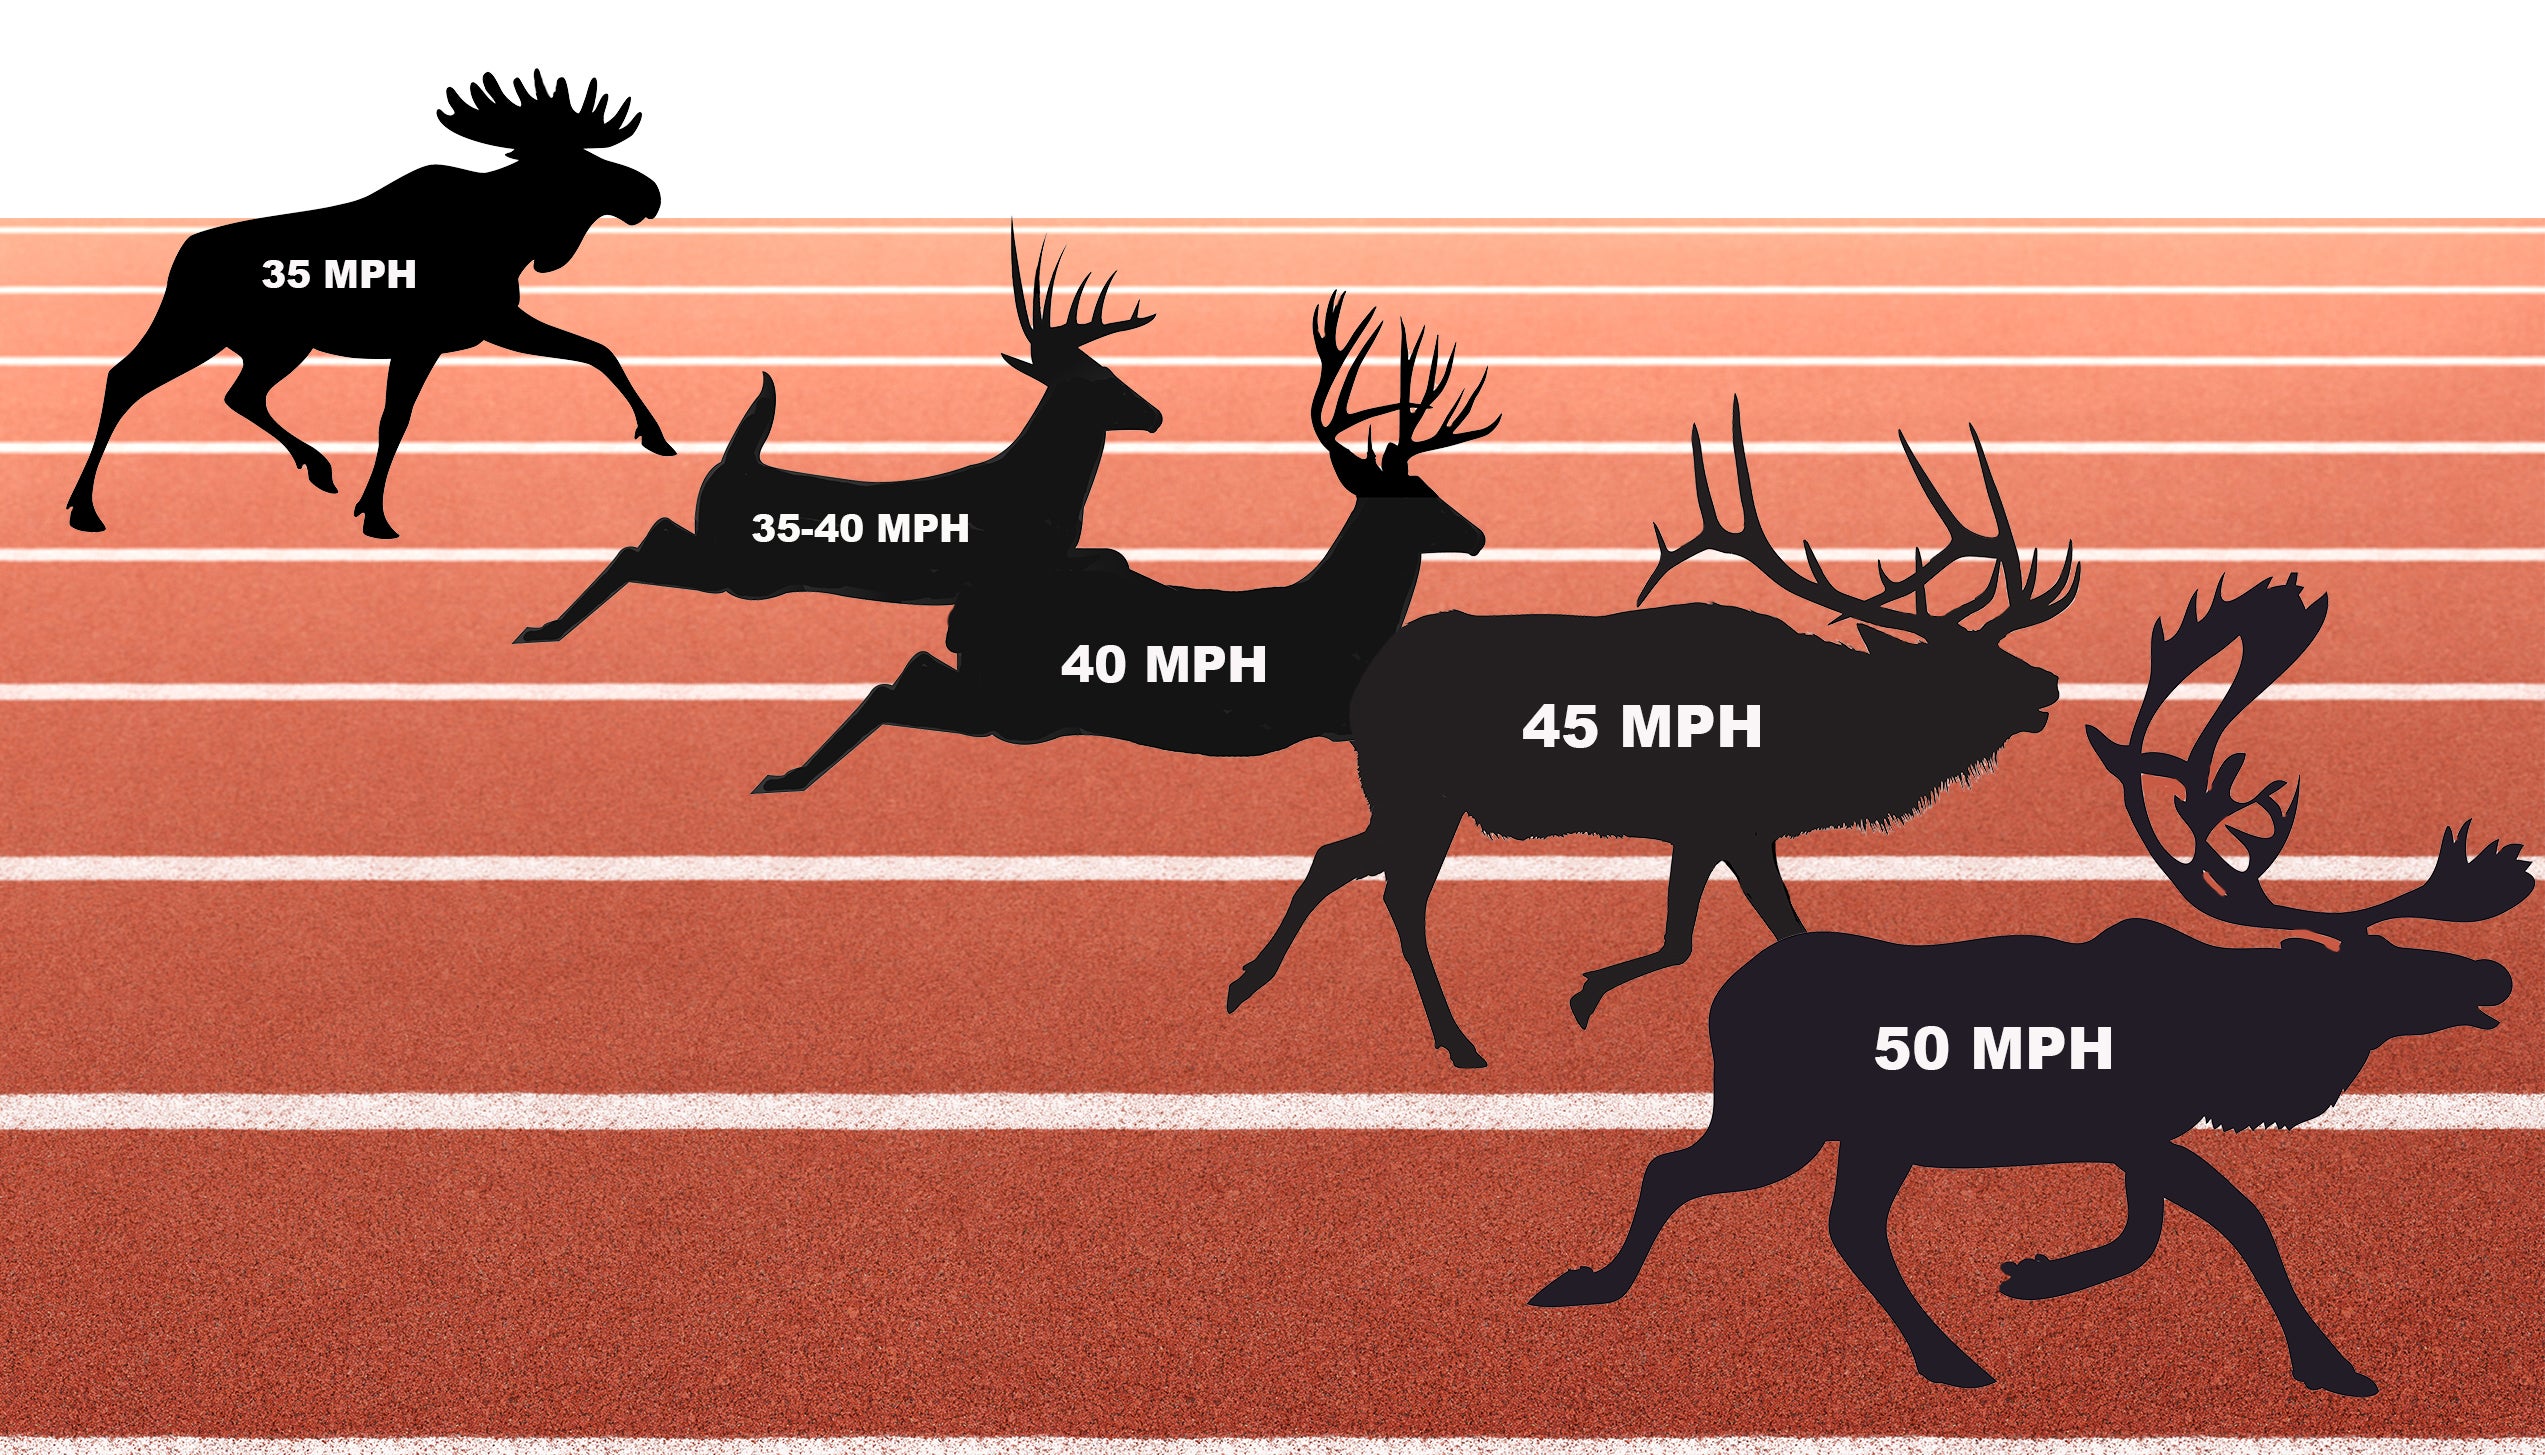 Graphic showing caribou, elk, mule deer, whitetail deer, and moose on track with speeds